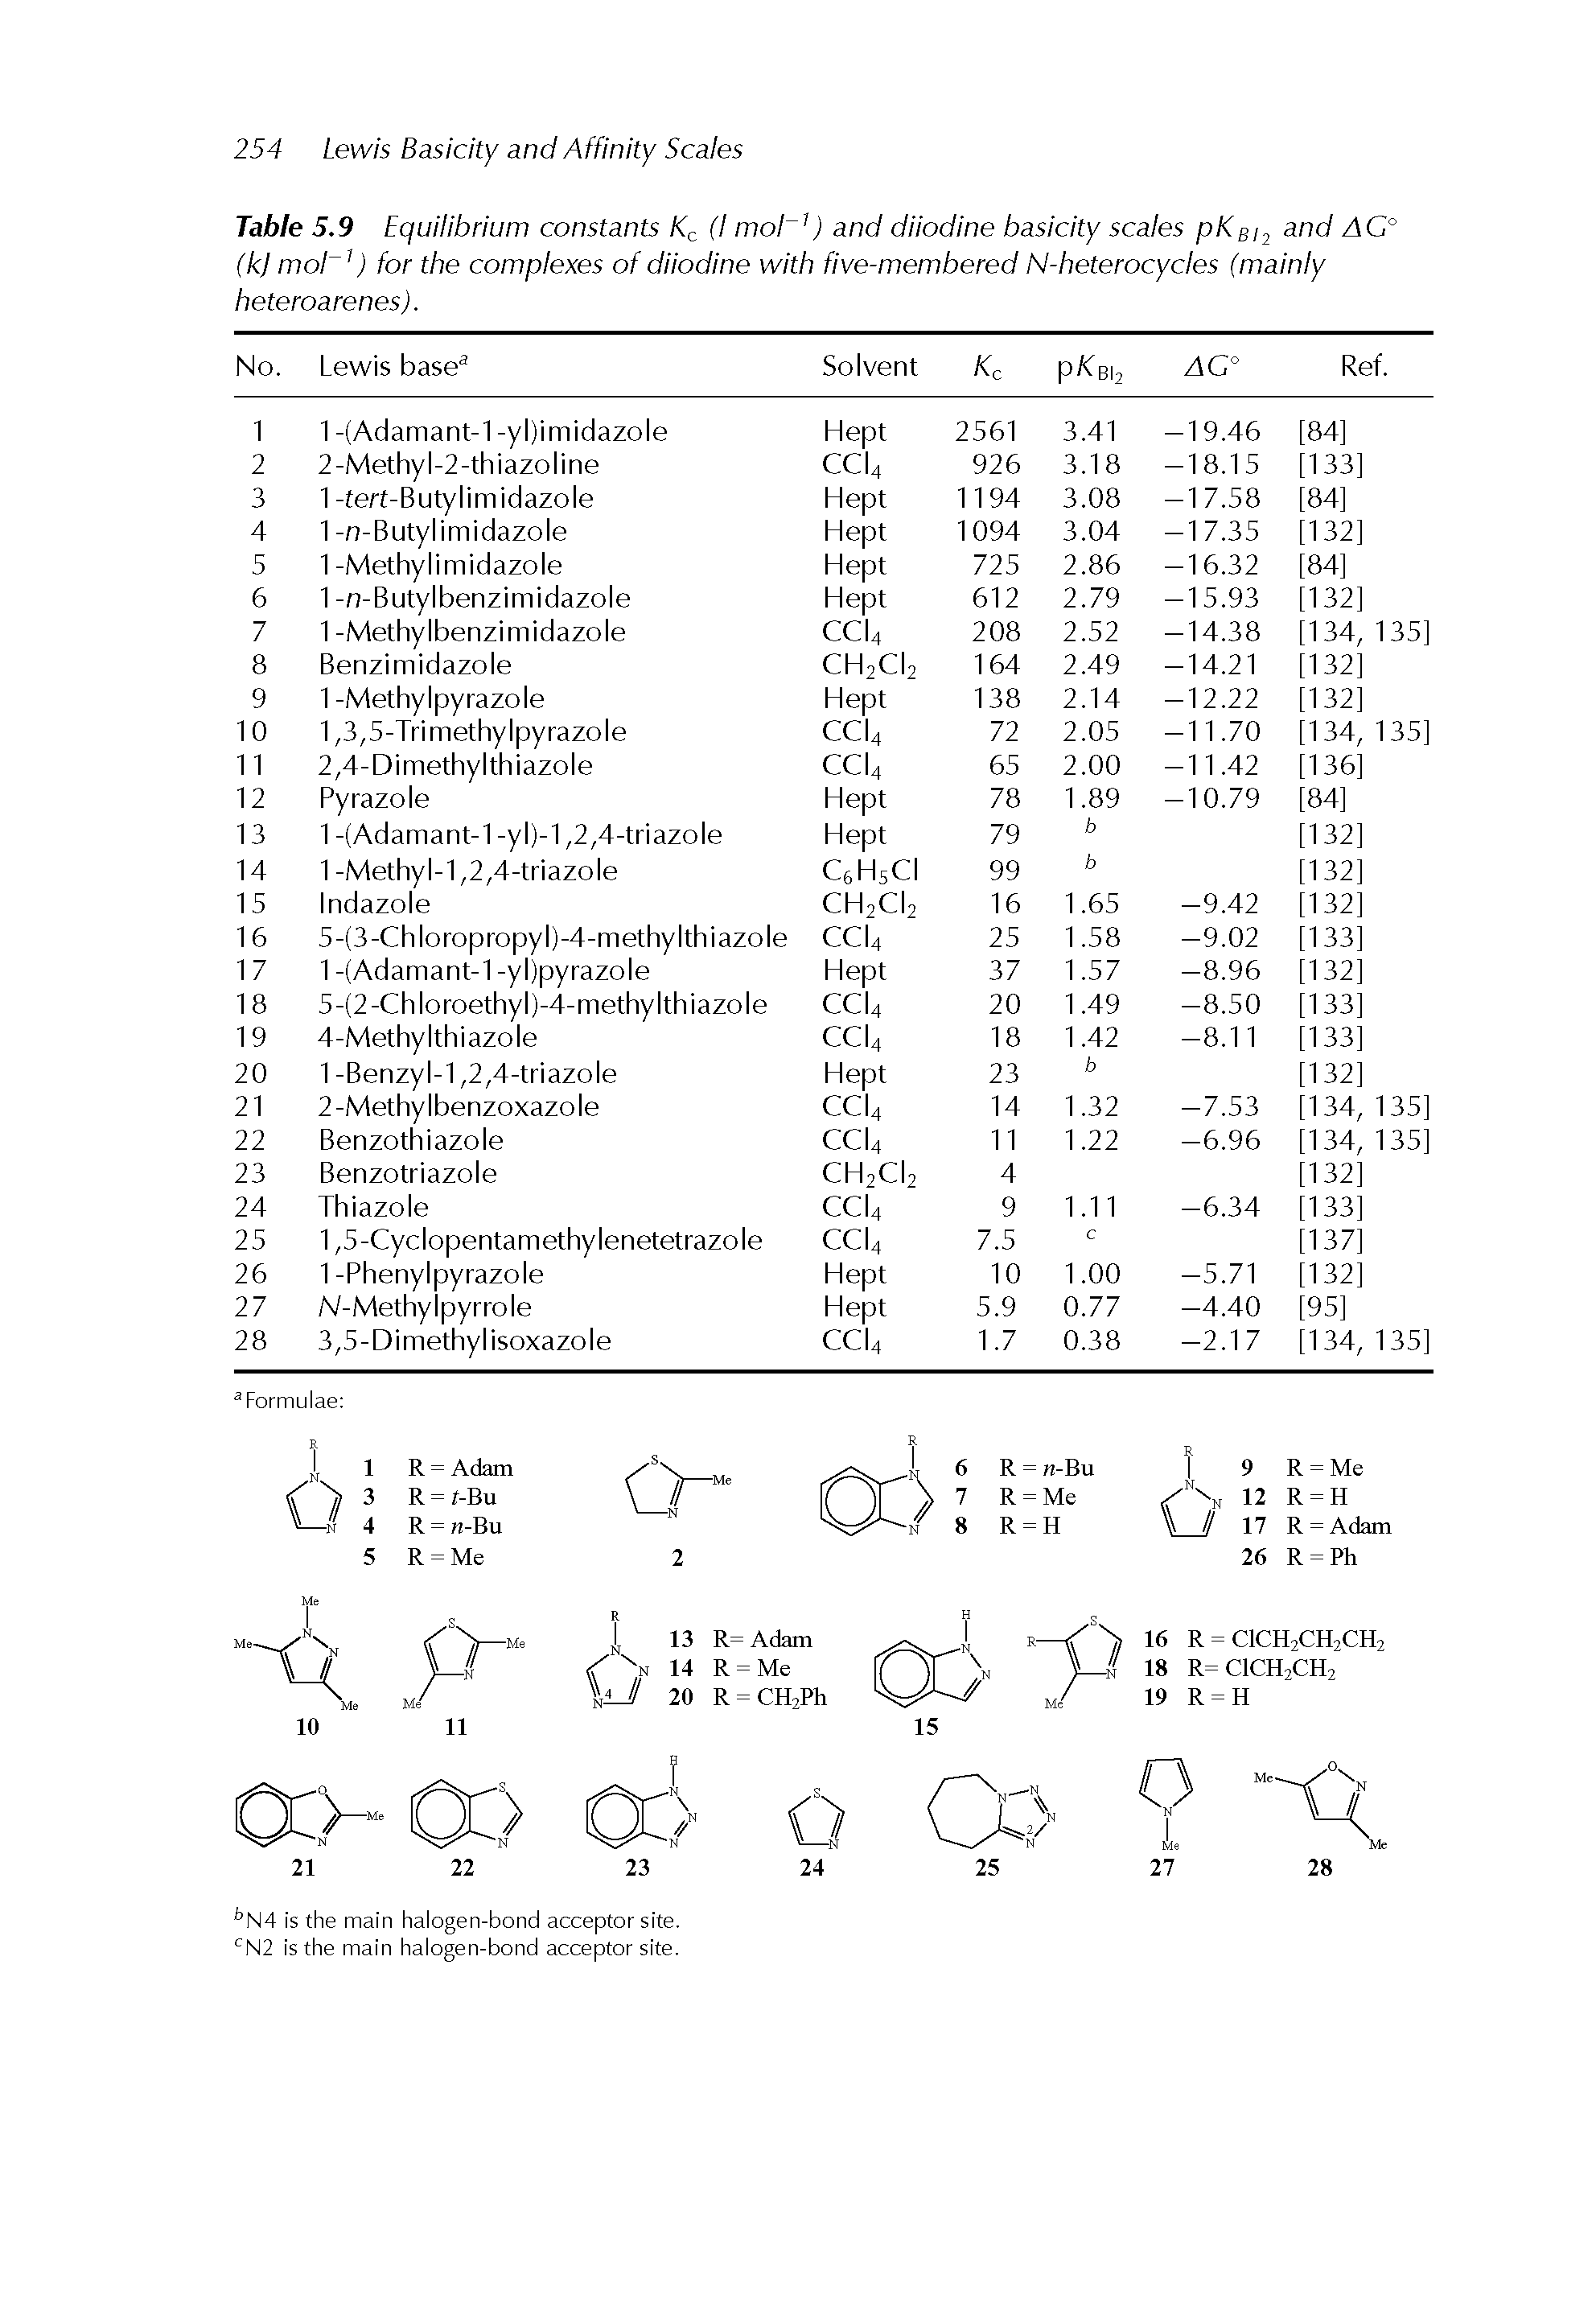 Table 5.9 Equilibrium constants (I ) and diiodine basicity scales pKgi and AC° (kj moh ) for the complexes of diiodine with five-membered N-heterocycles (mainly heteroarenes).